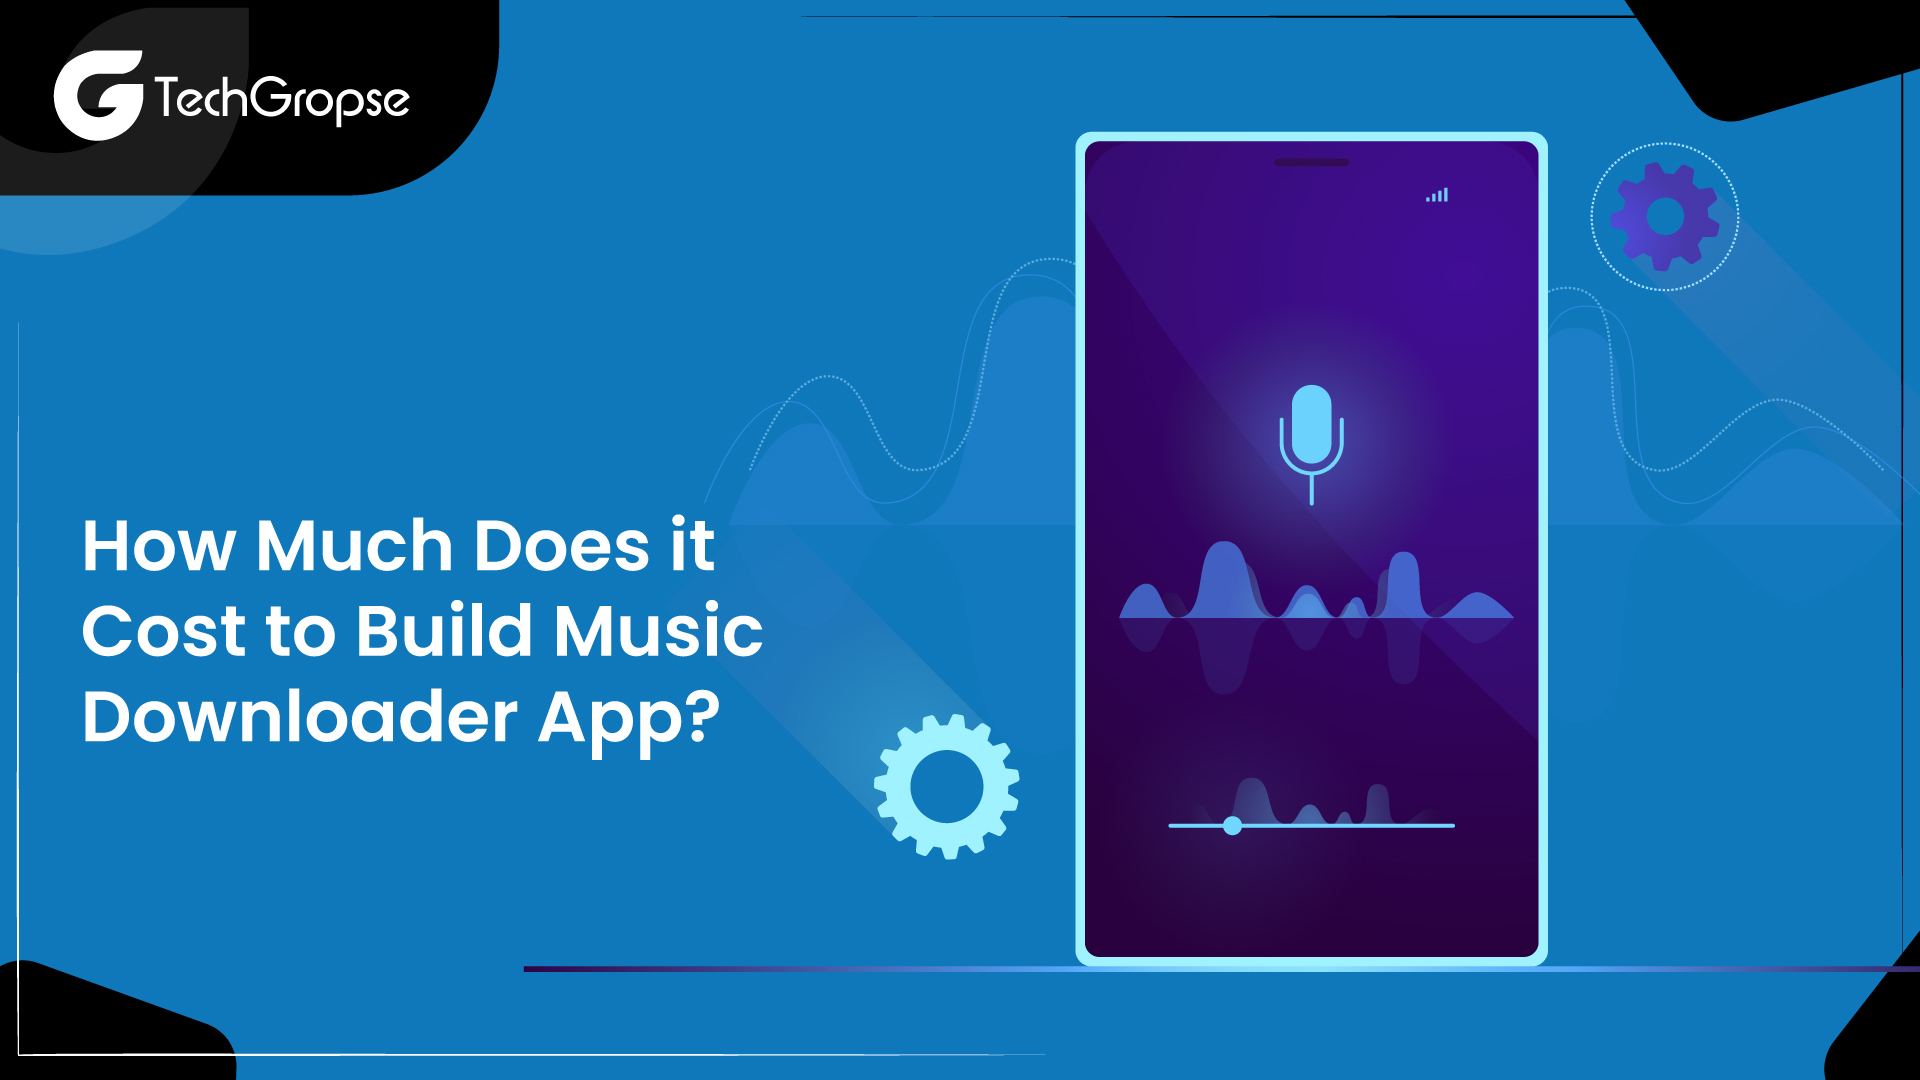 How Much Does it Cost to Build a Music Downloader App?